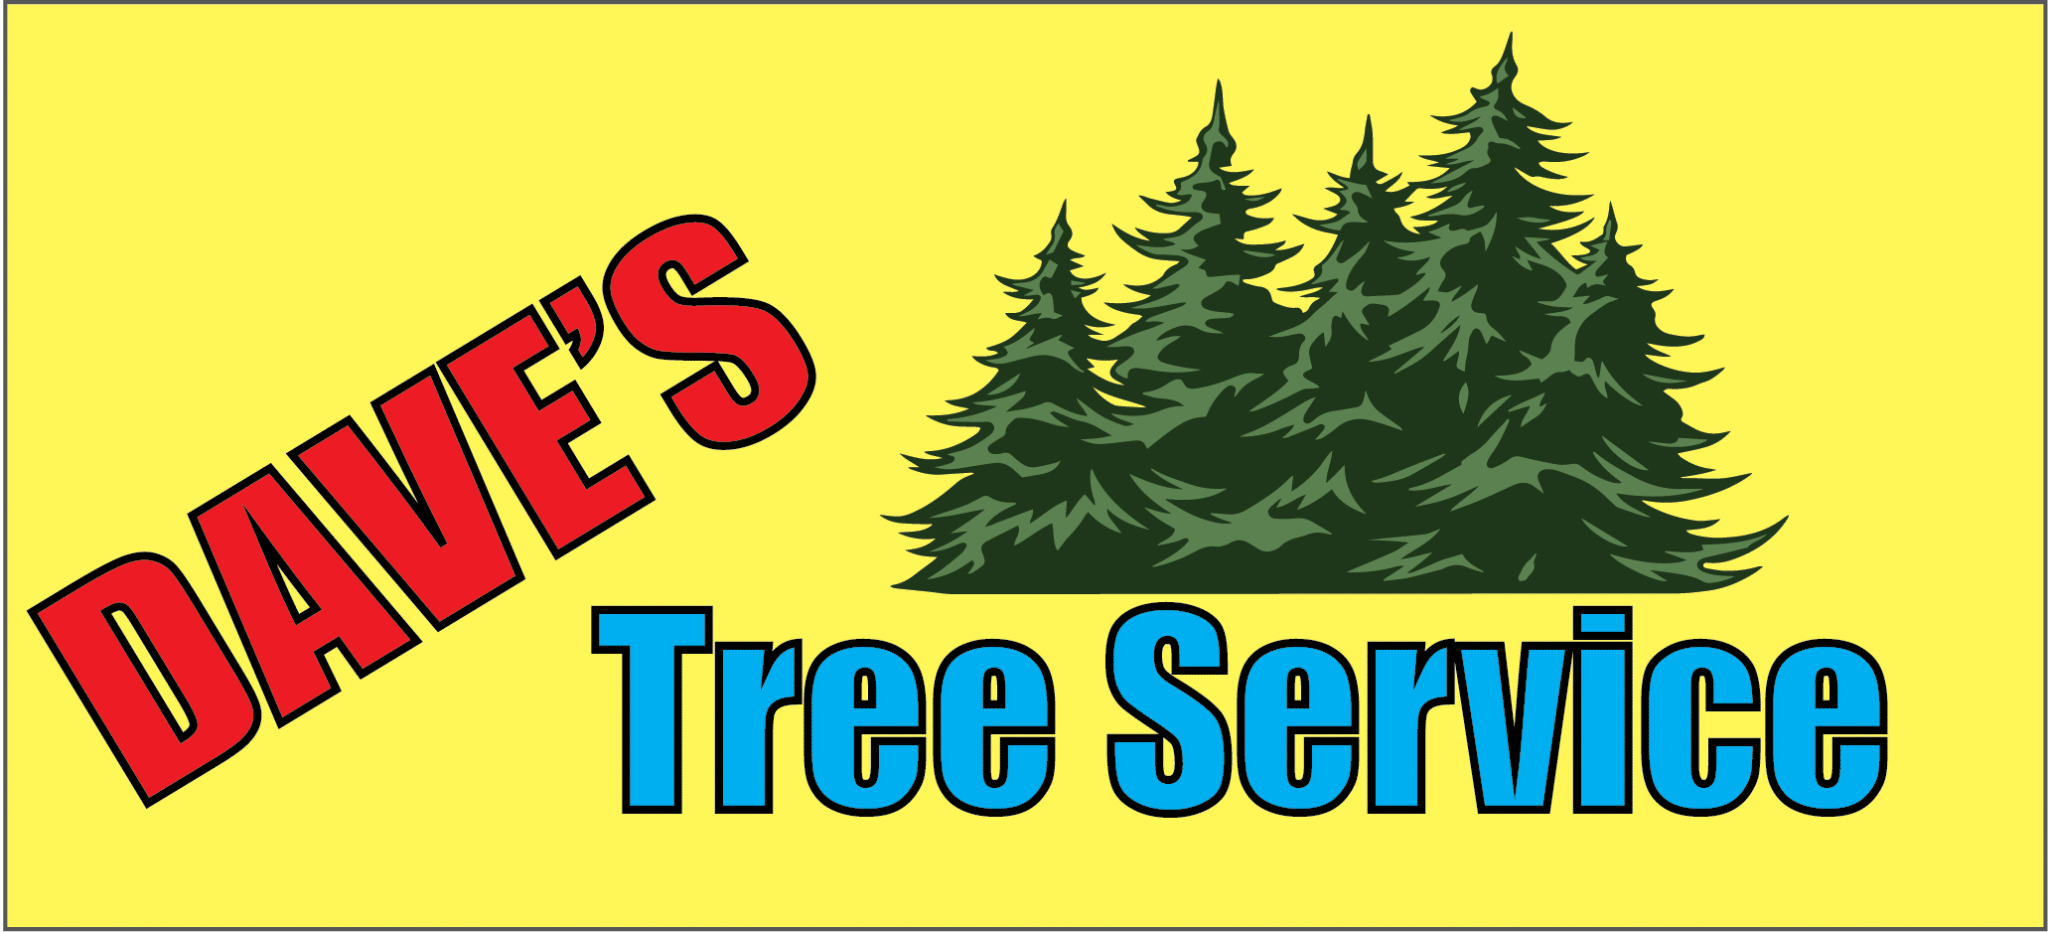 Expert Tree Services in Wisconsin | Foley's Tree Service LLC